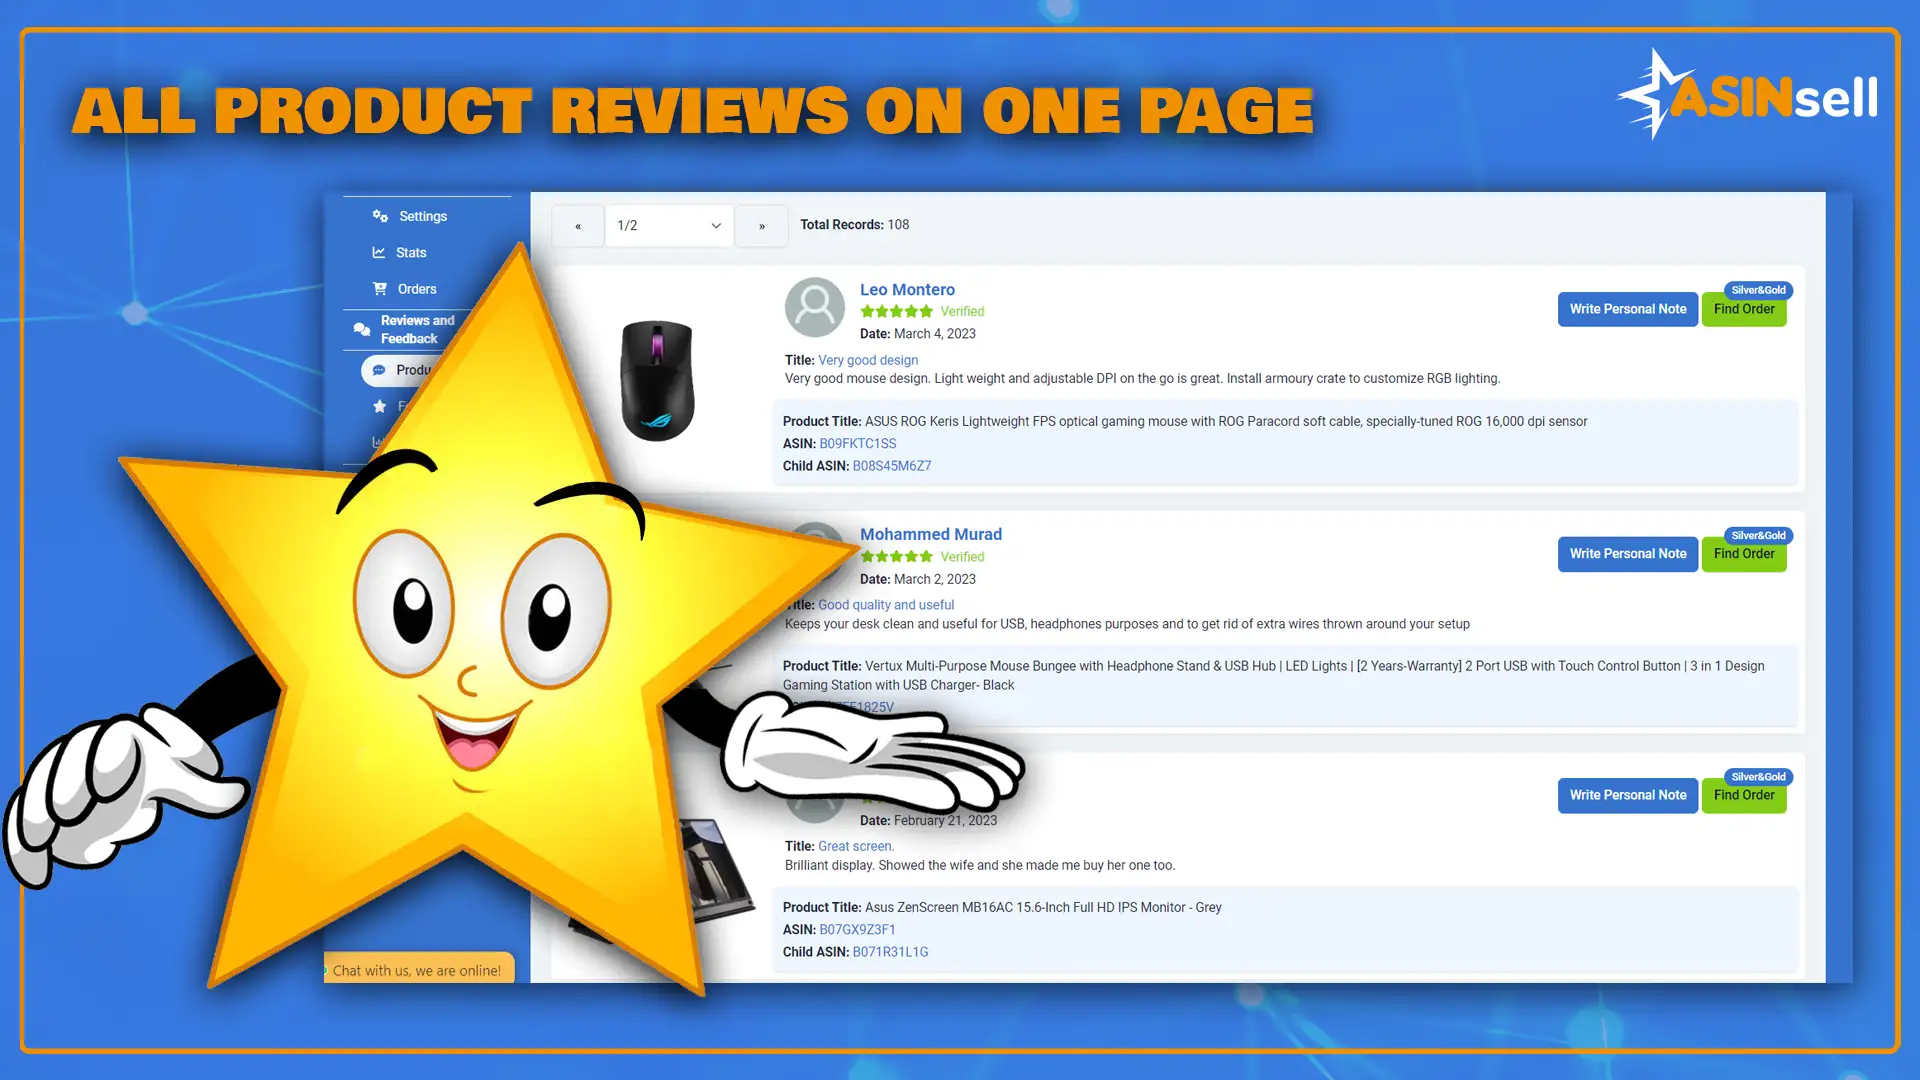 All Reviews Are On One Page